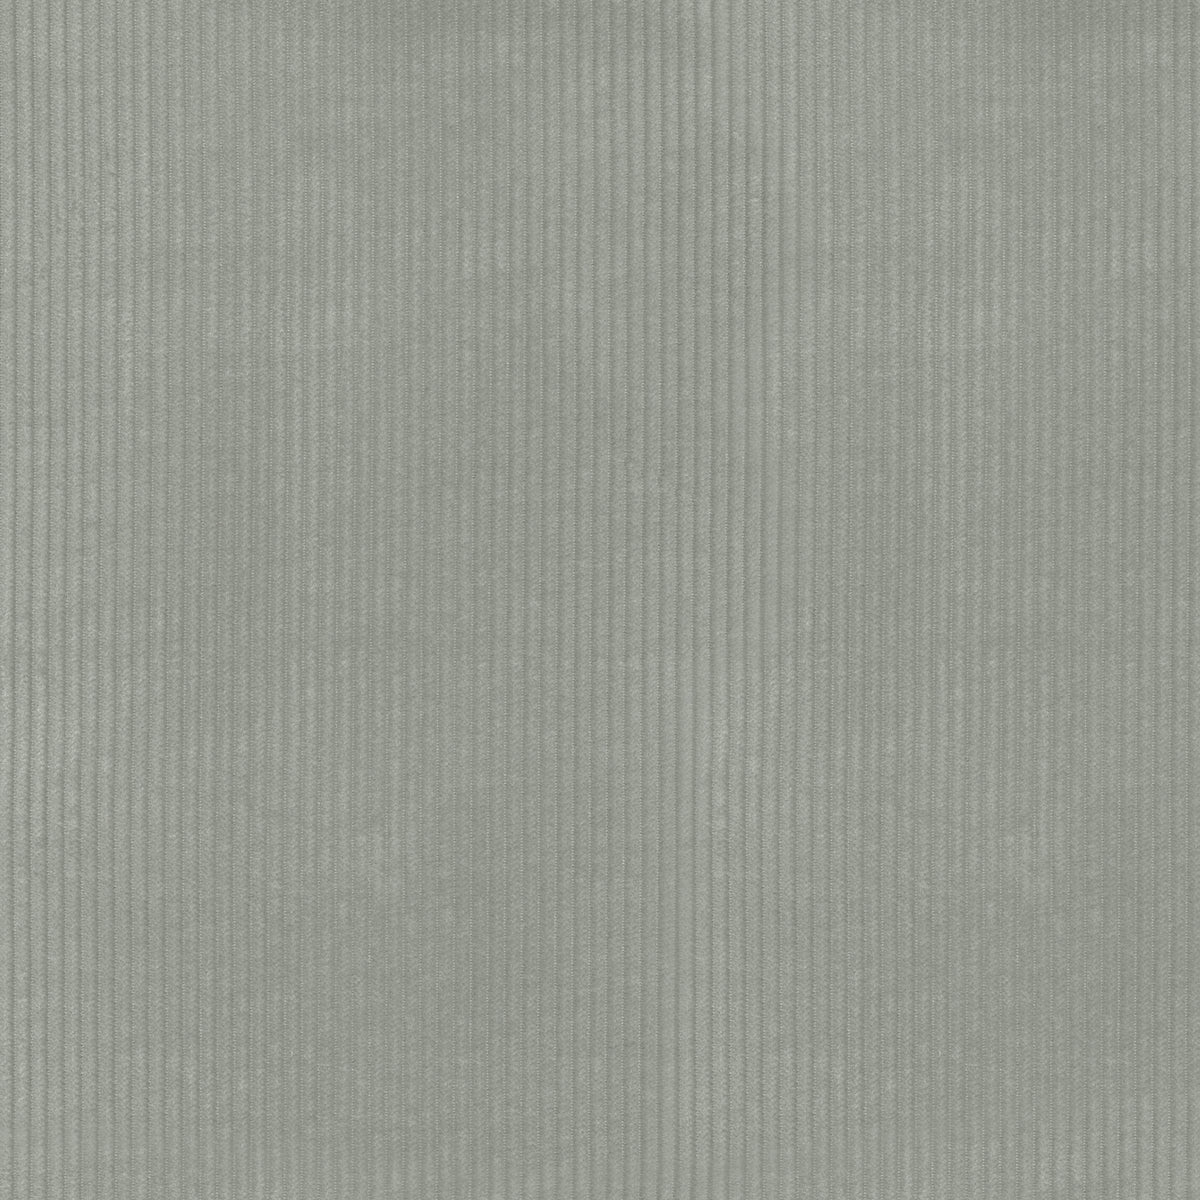 P/K Lifestyles Wales - Cloud 412042 Upholstery Fabric